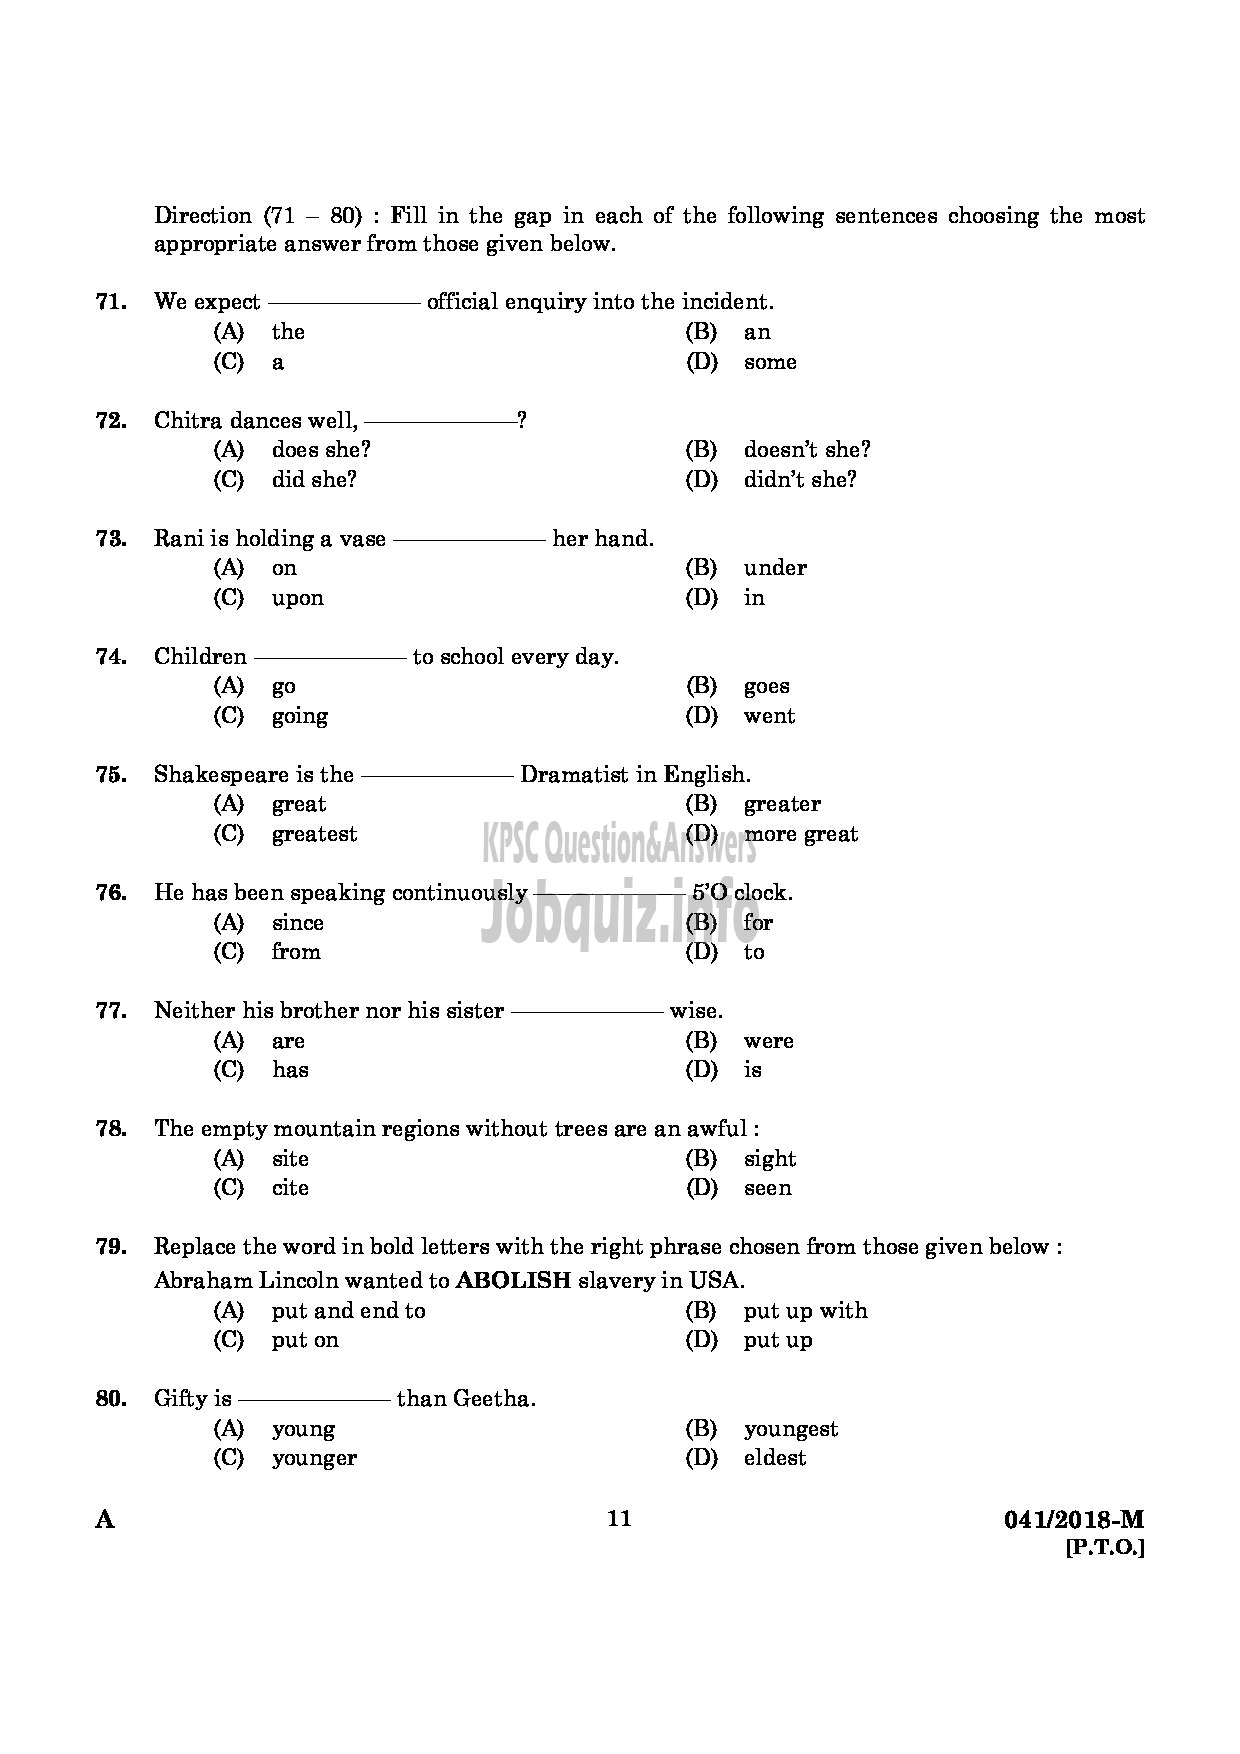 Kerala PSC Question Paper - WOMEN POLICE CONSTABLE NCA LC/AI AND MUSLIM POLICE MALAYALAM-9